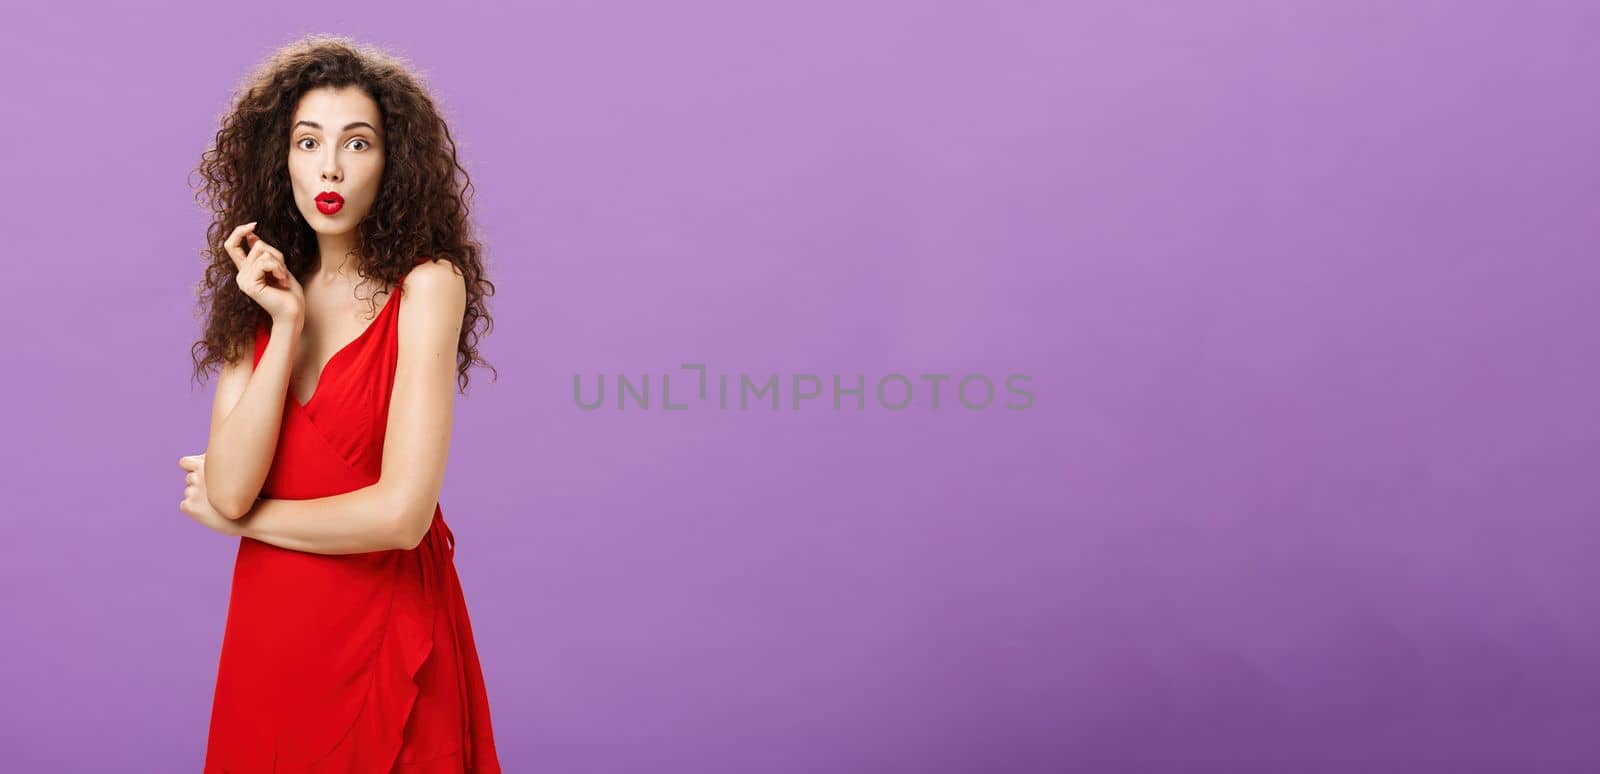 Intrigued chaming elegant lady with curly hairstyle. in red dress and lipstick folding lips curiously touching hair strand being amazed and impressed with rumors spreading around party over purple wall.